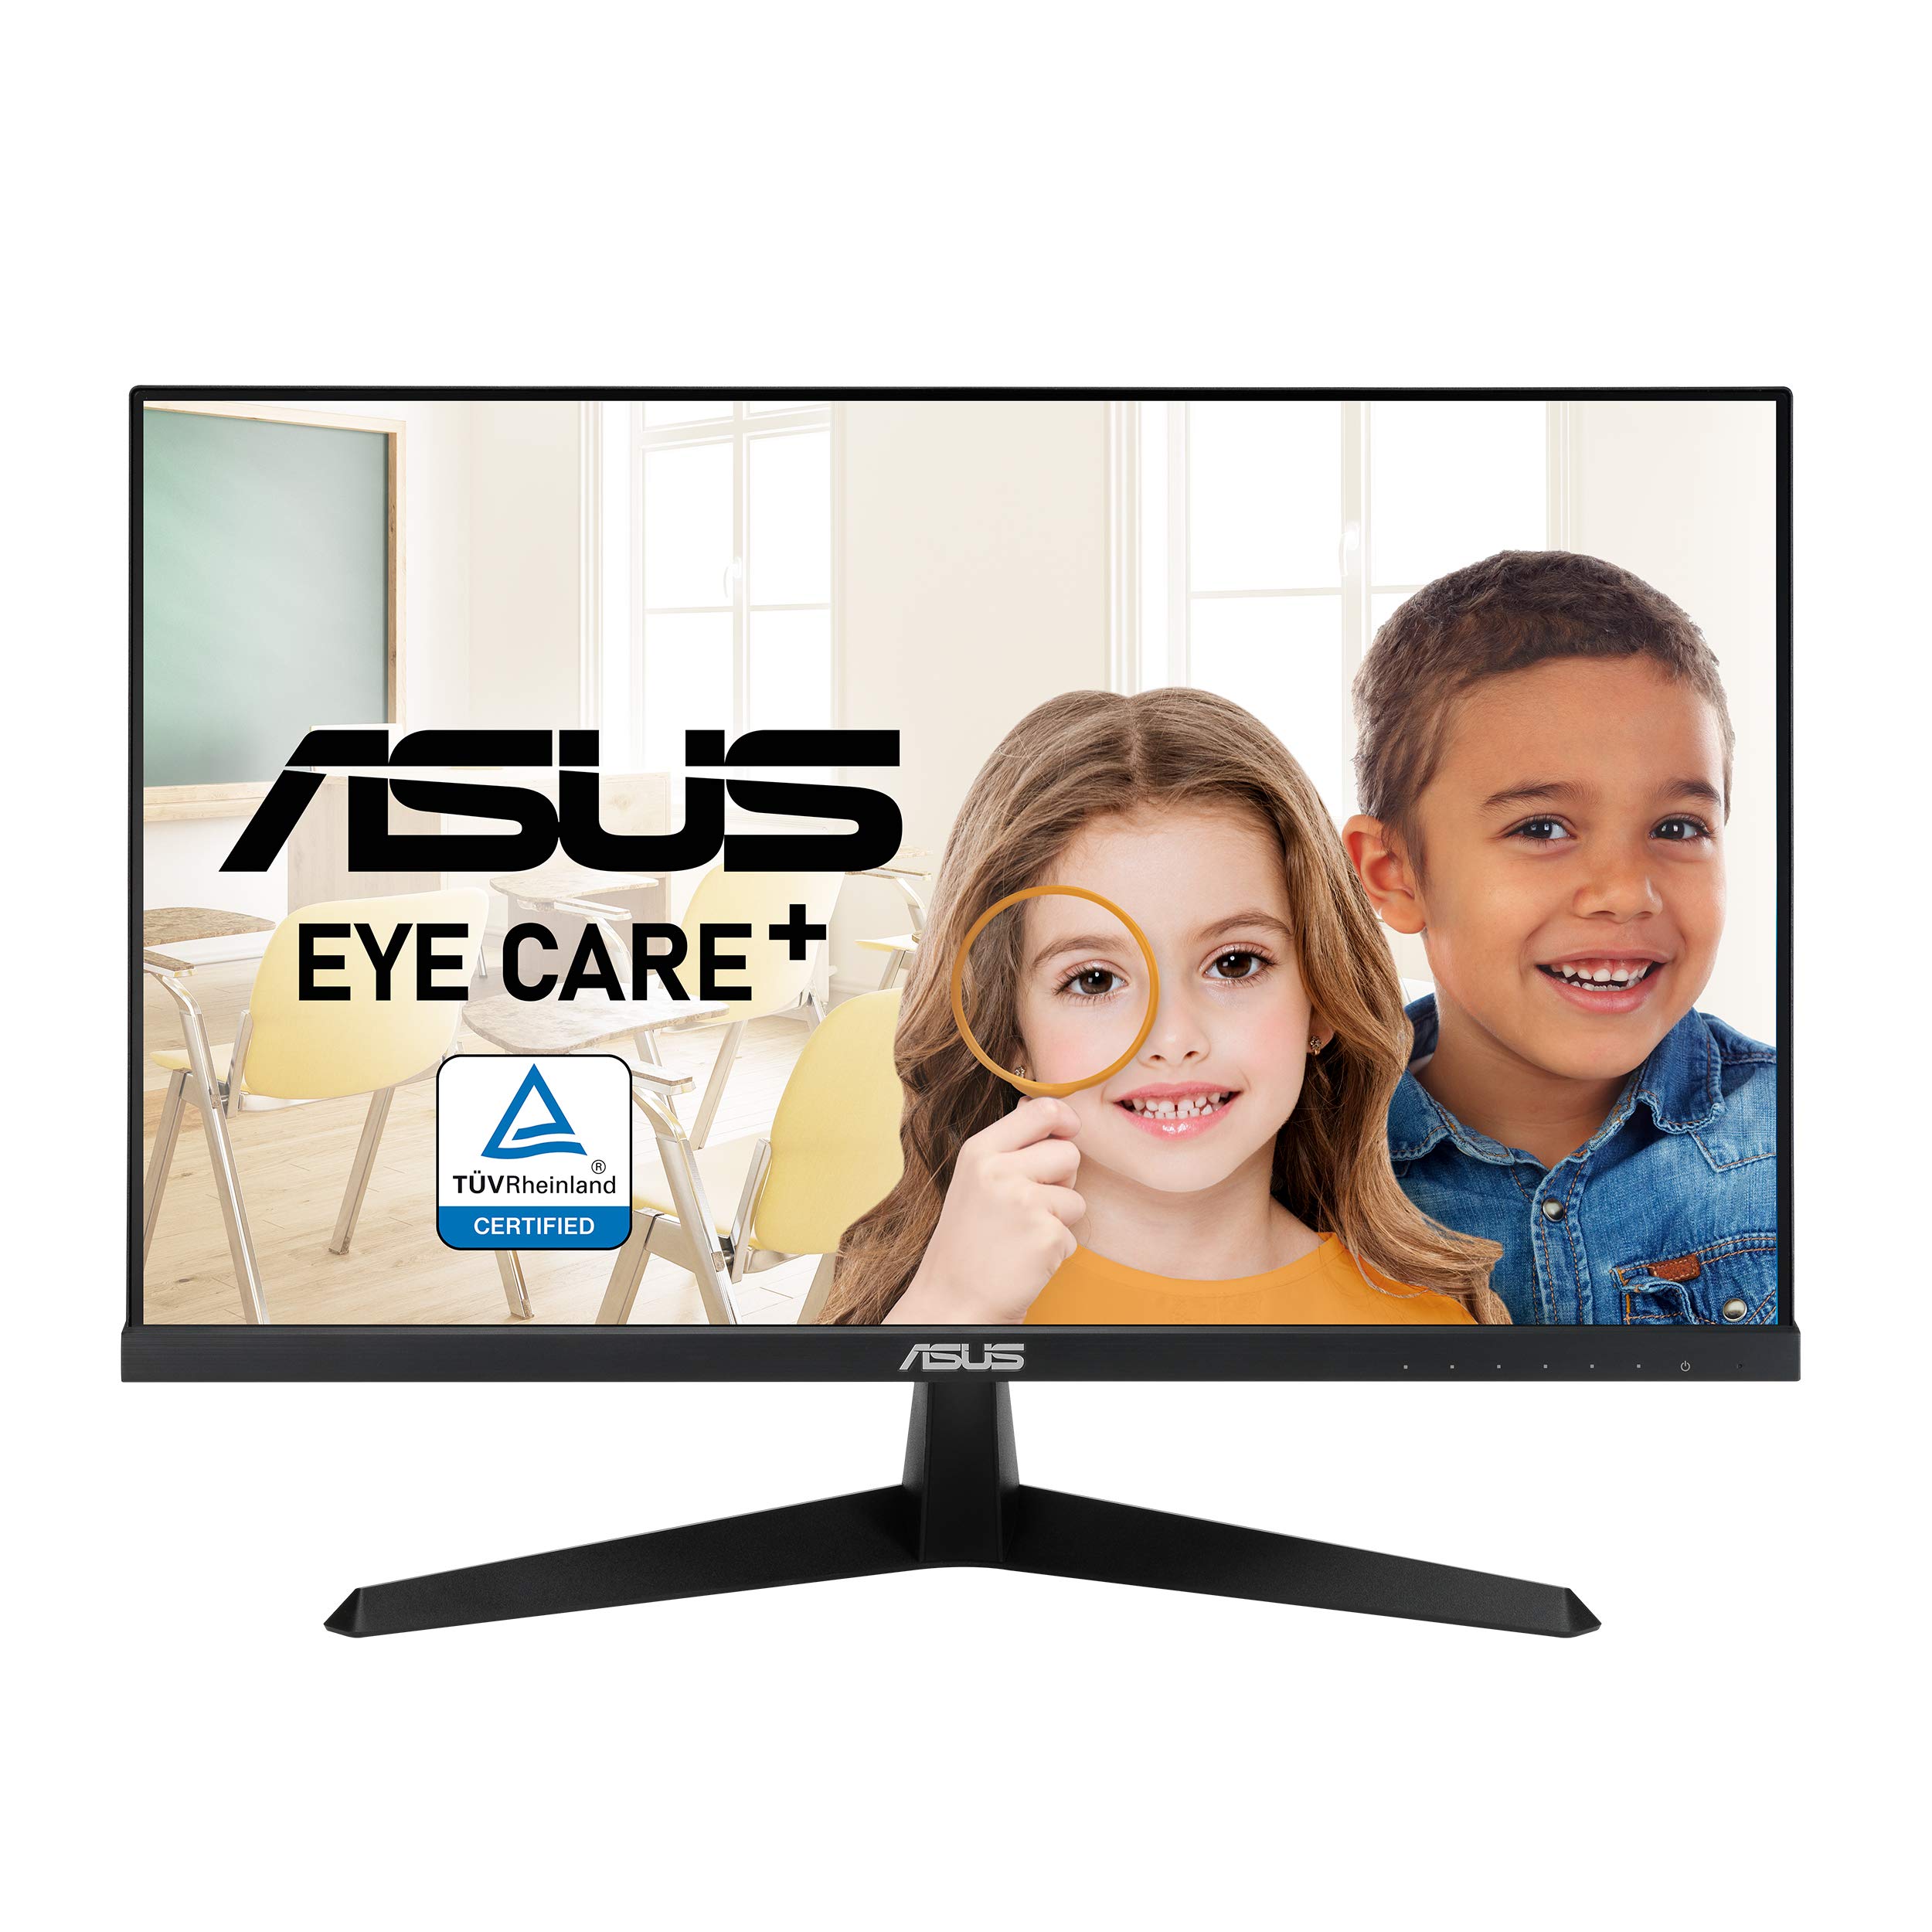 Asus VY249HE 23.8” Eye Care Monitor, 1080P Full HD, 75H...